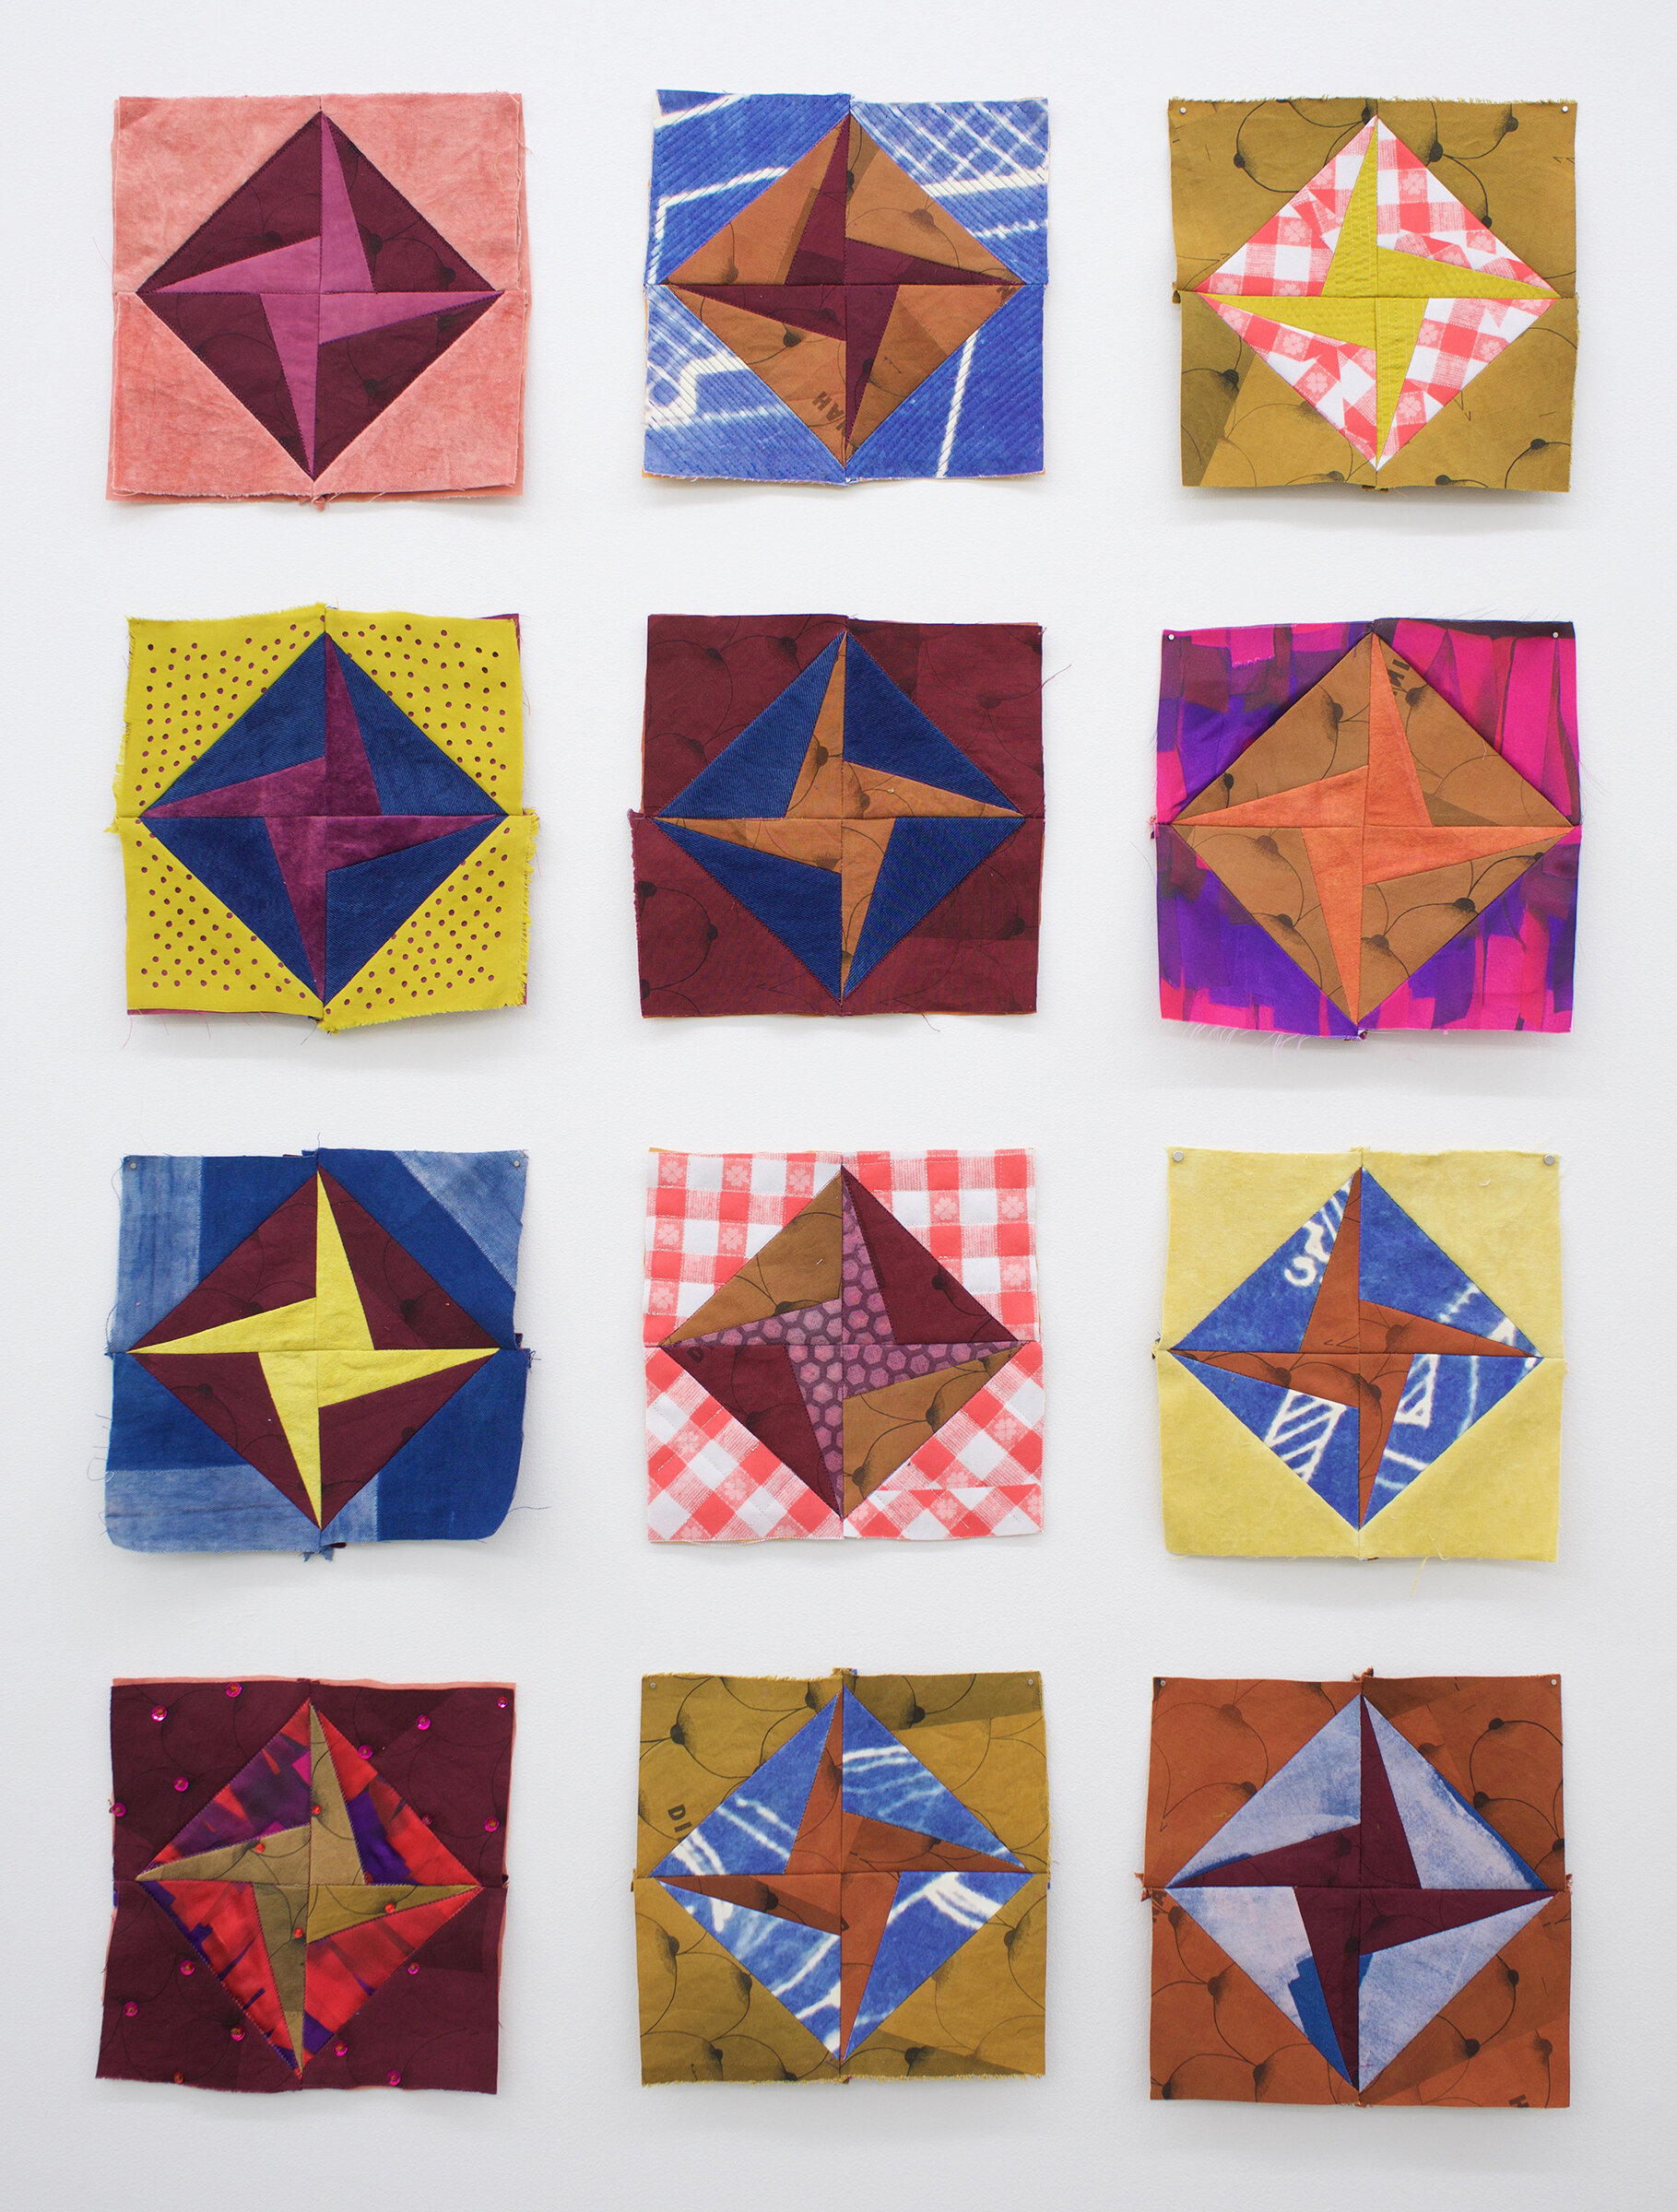  AMANDA CURRERI  Dinah* Doubles (Waste Not) , 2021&nbsp; Natural dyes on cotton, silk, and velvet; digitally-printed textiles, thread, and sequins Approx 10” x 10” each, grid of twelve blocks    